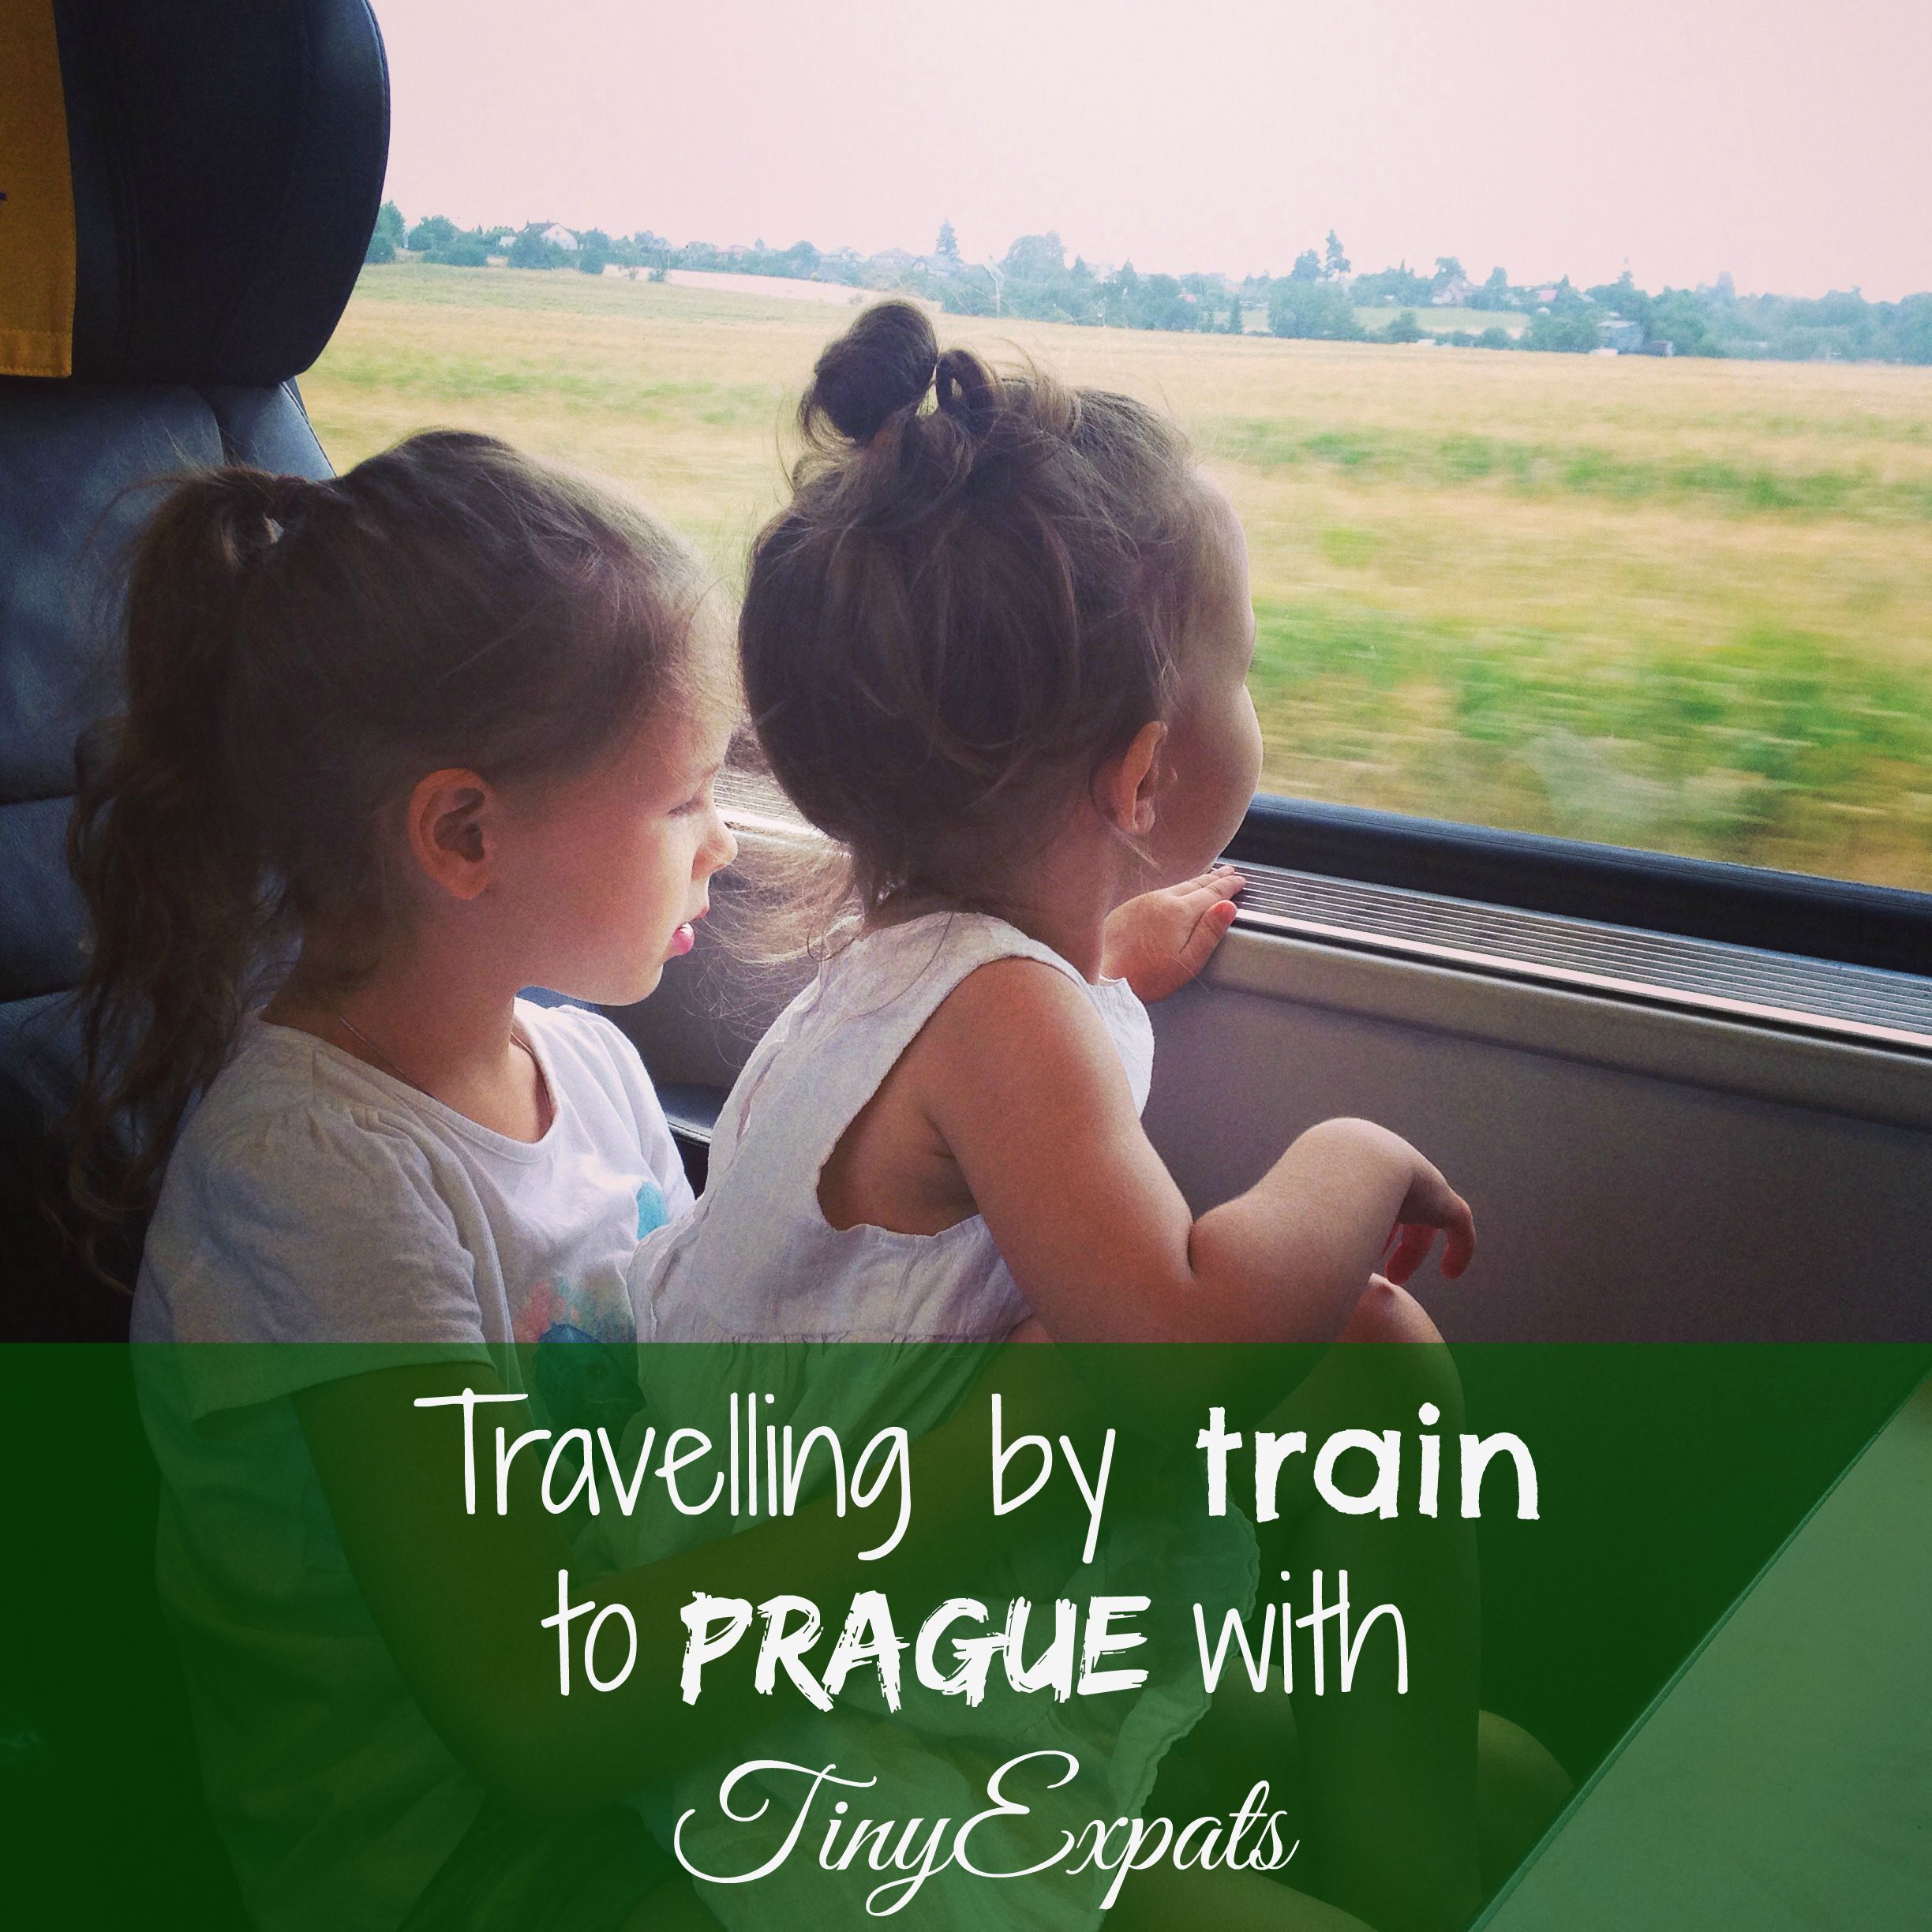 Going by train to Prague with tiny expats